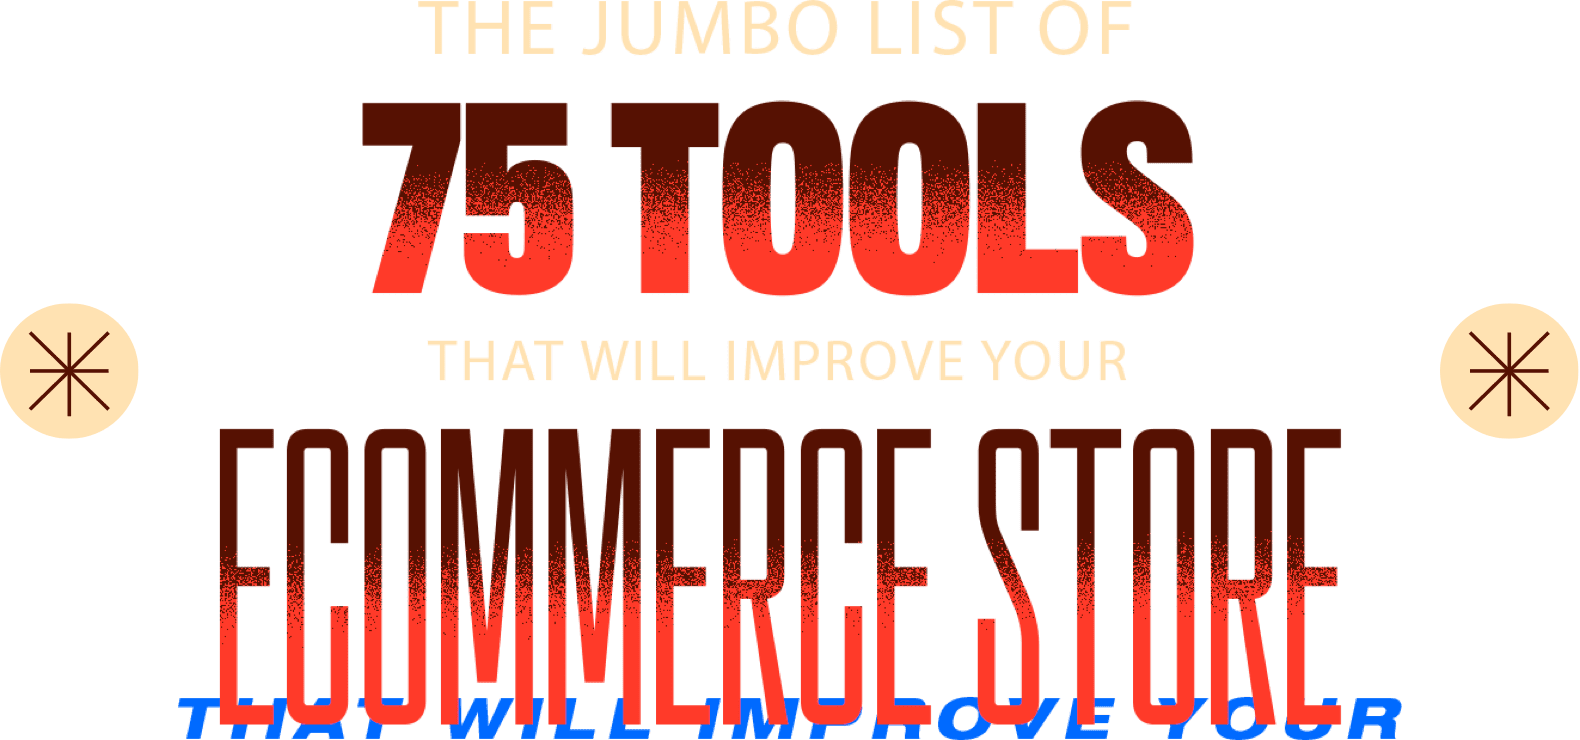 The jumbo list of 75 tools that will improve your ecommerce store